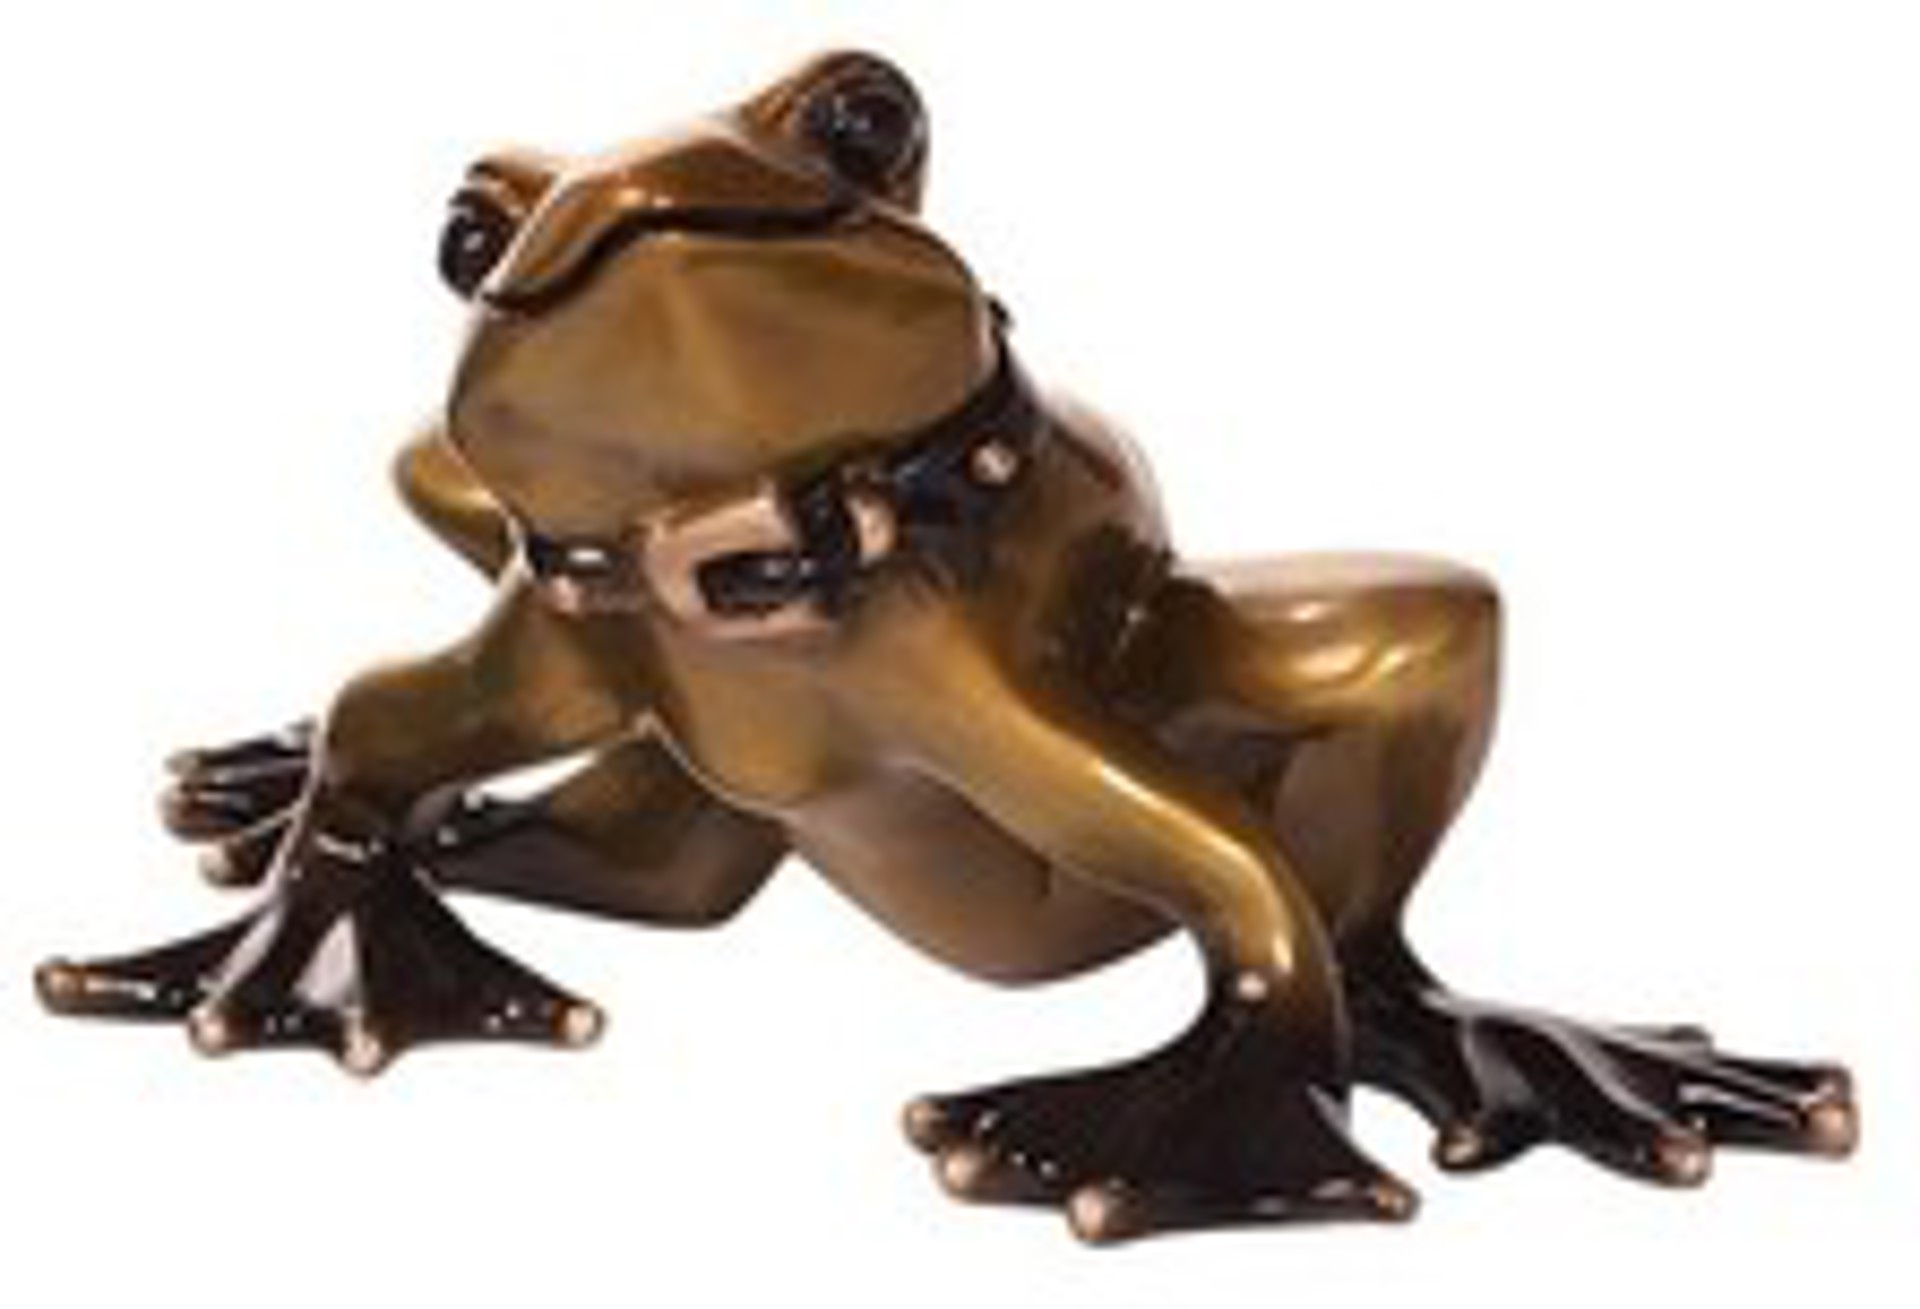 Basel, The Frog by Marty Goldstein